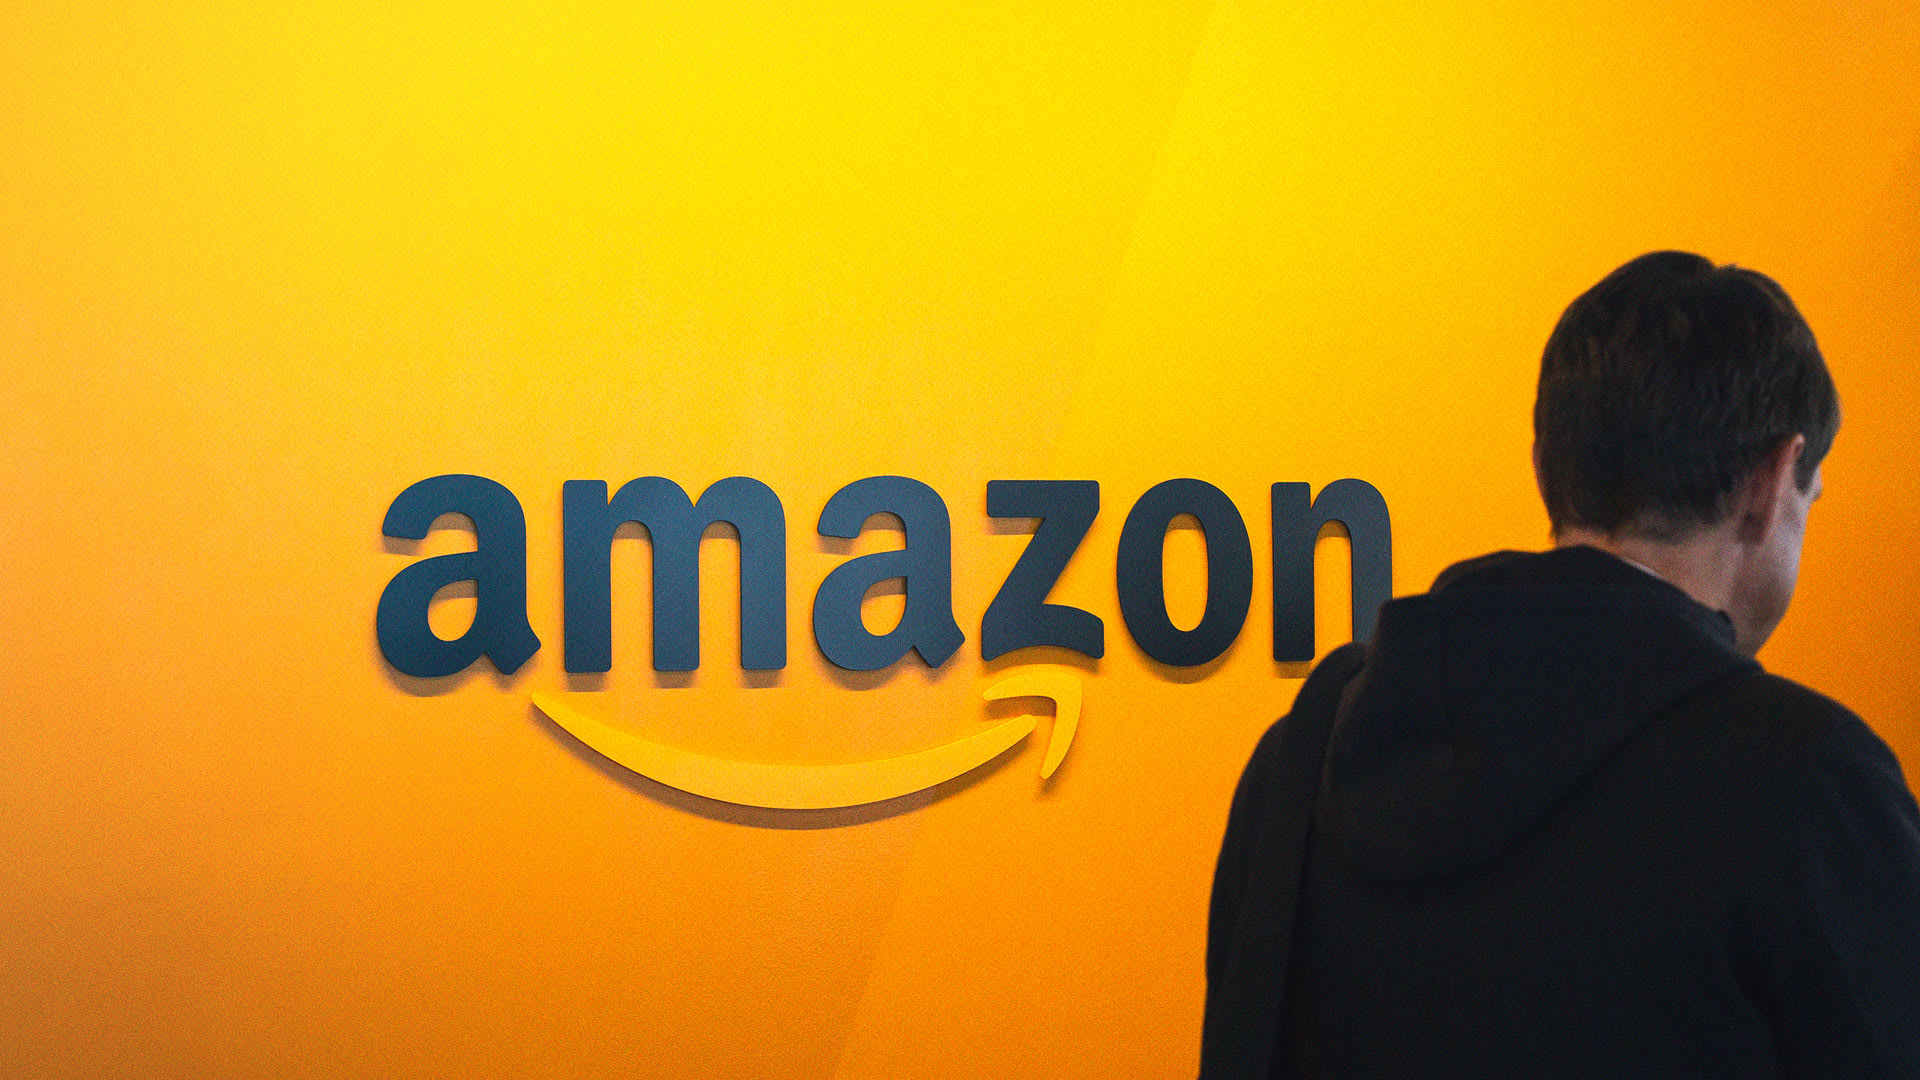 I Hire New Grads At Amazon—Here Are 4 Qualities That Can Help You Stand Out